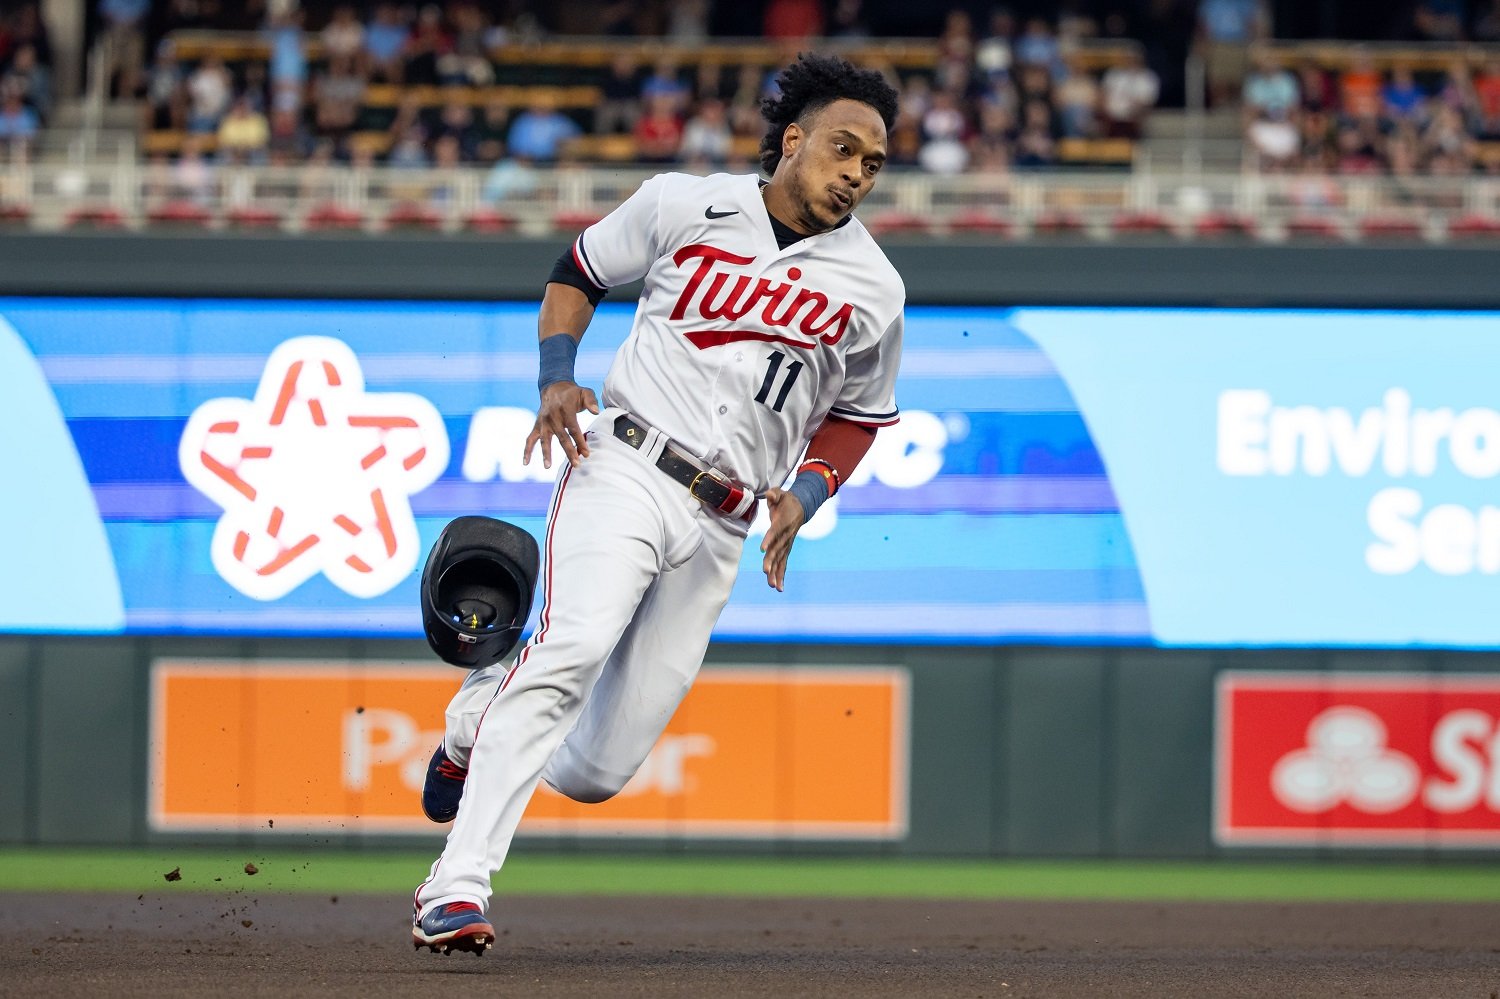 Jorge Polanco returns to second base for Twins, Max Kepler to